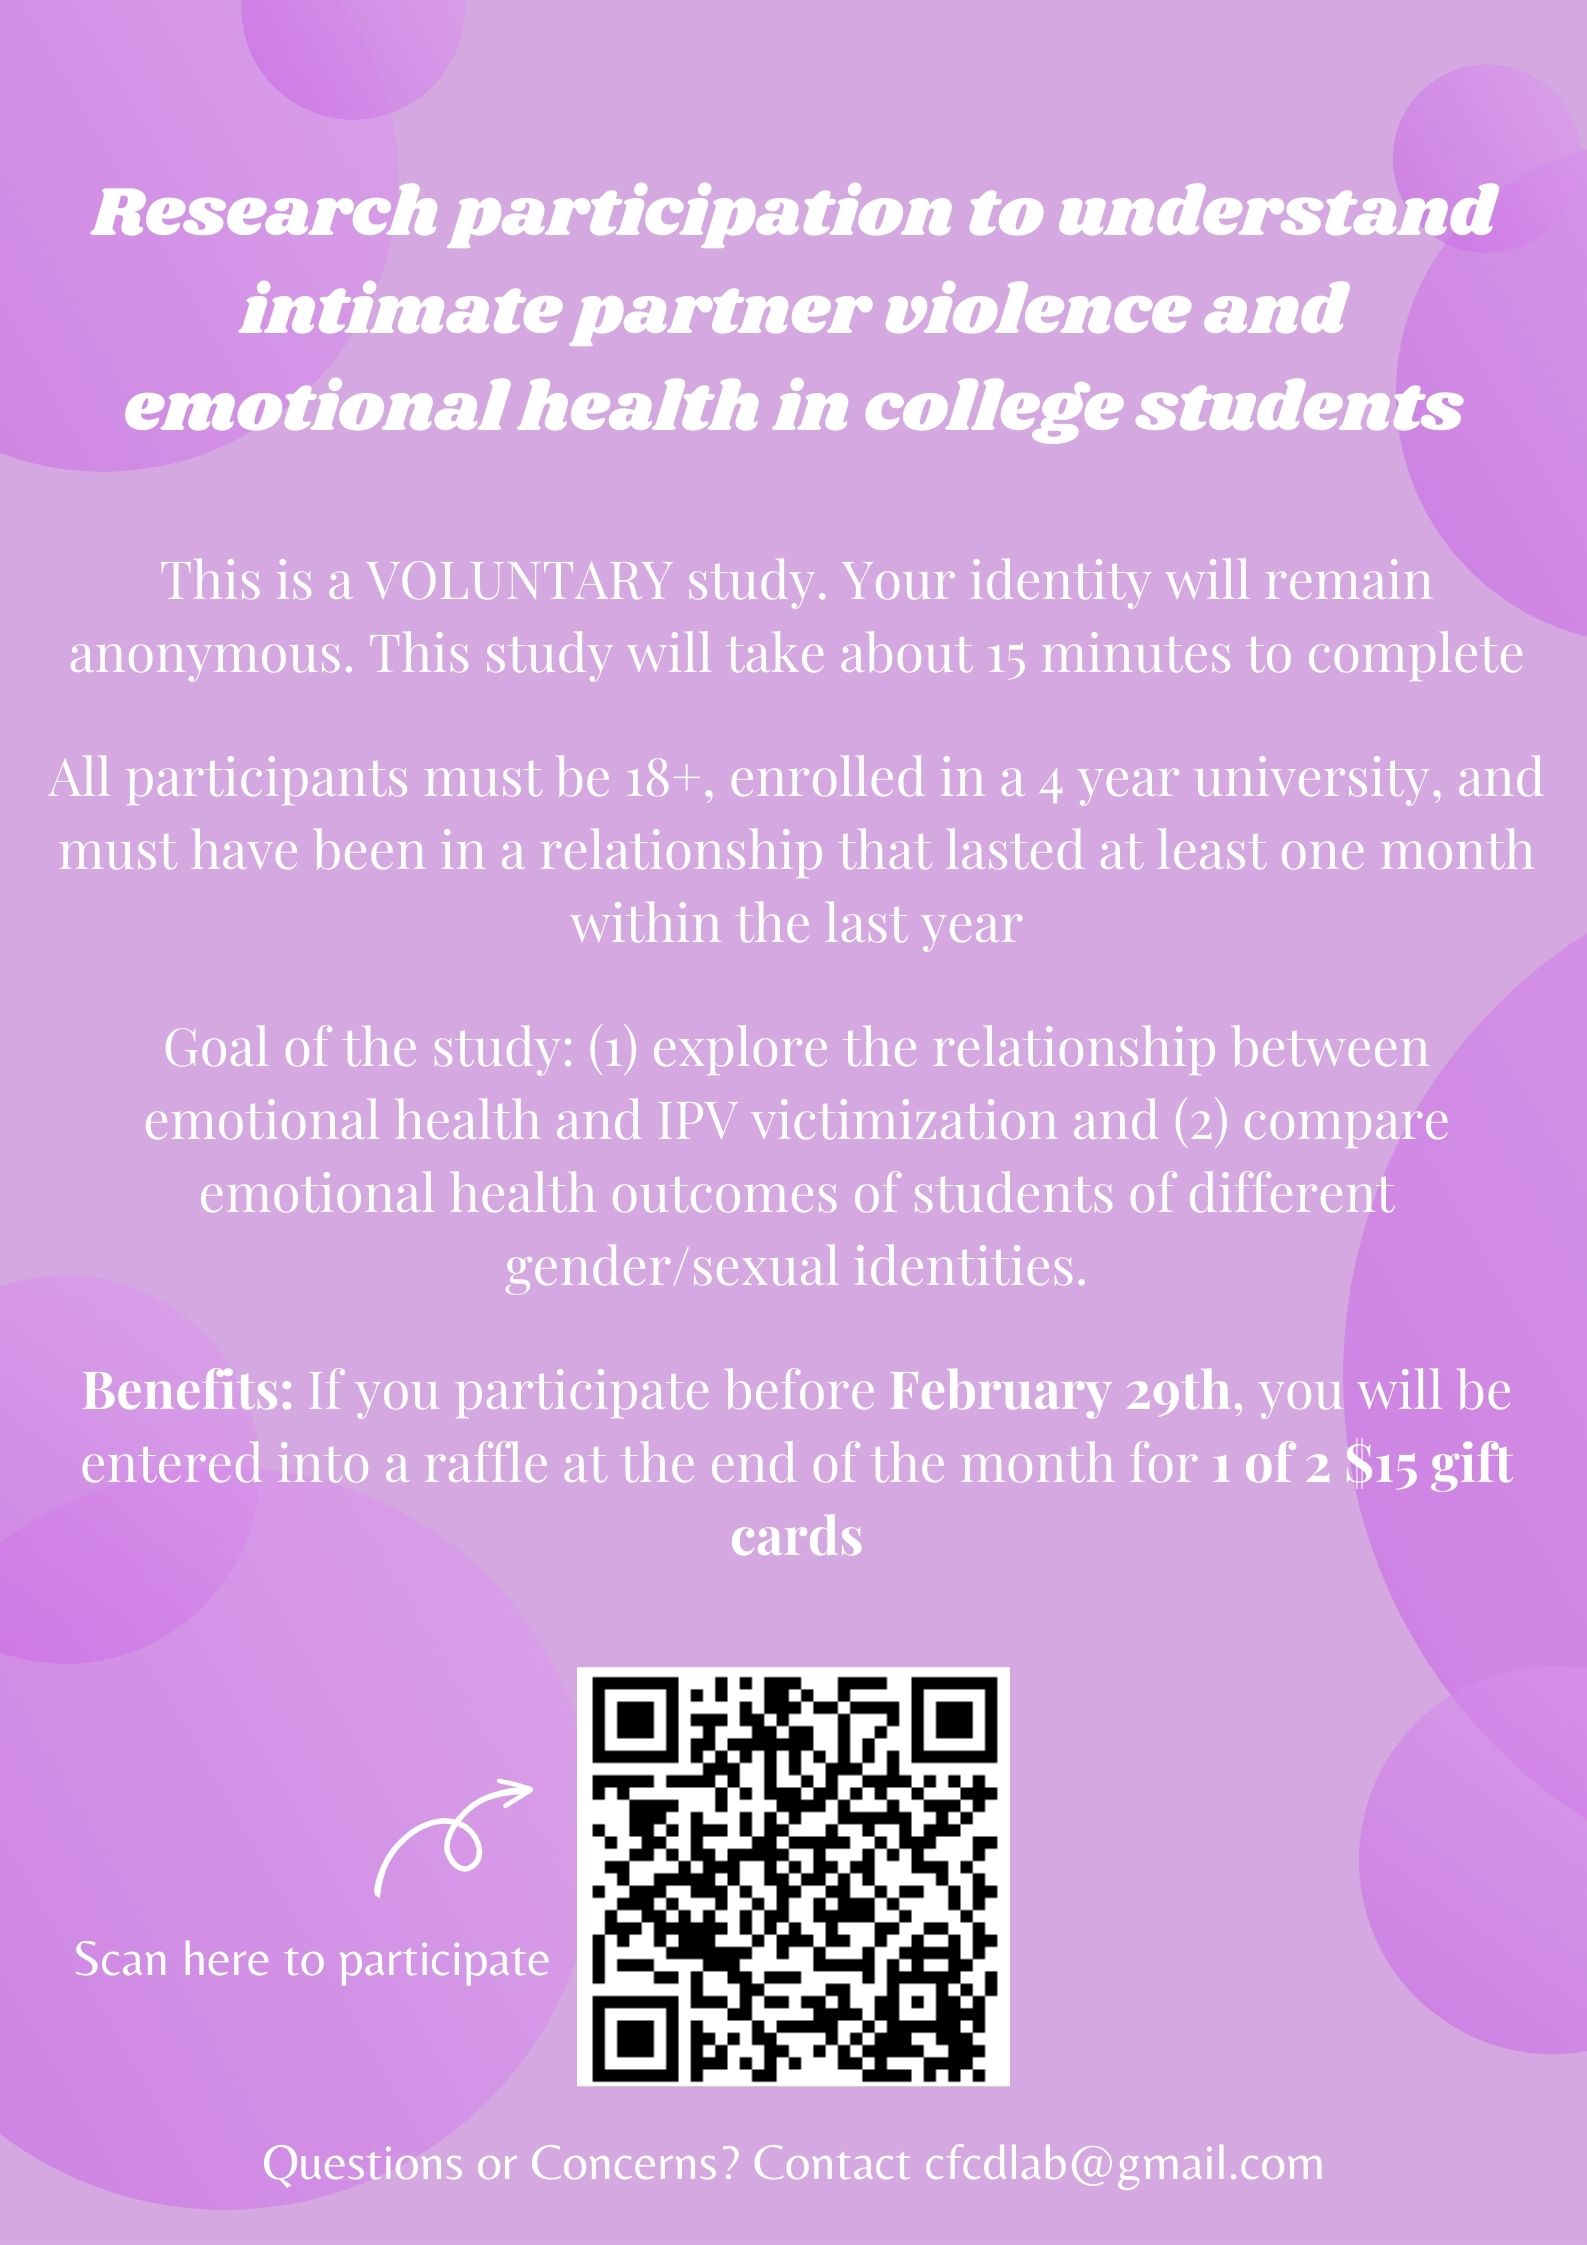 Research participation to understand intimate partner violence and emotional health in college students